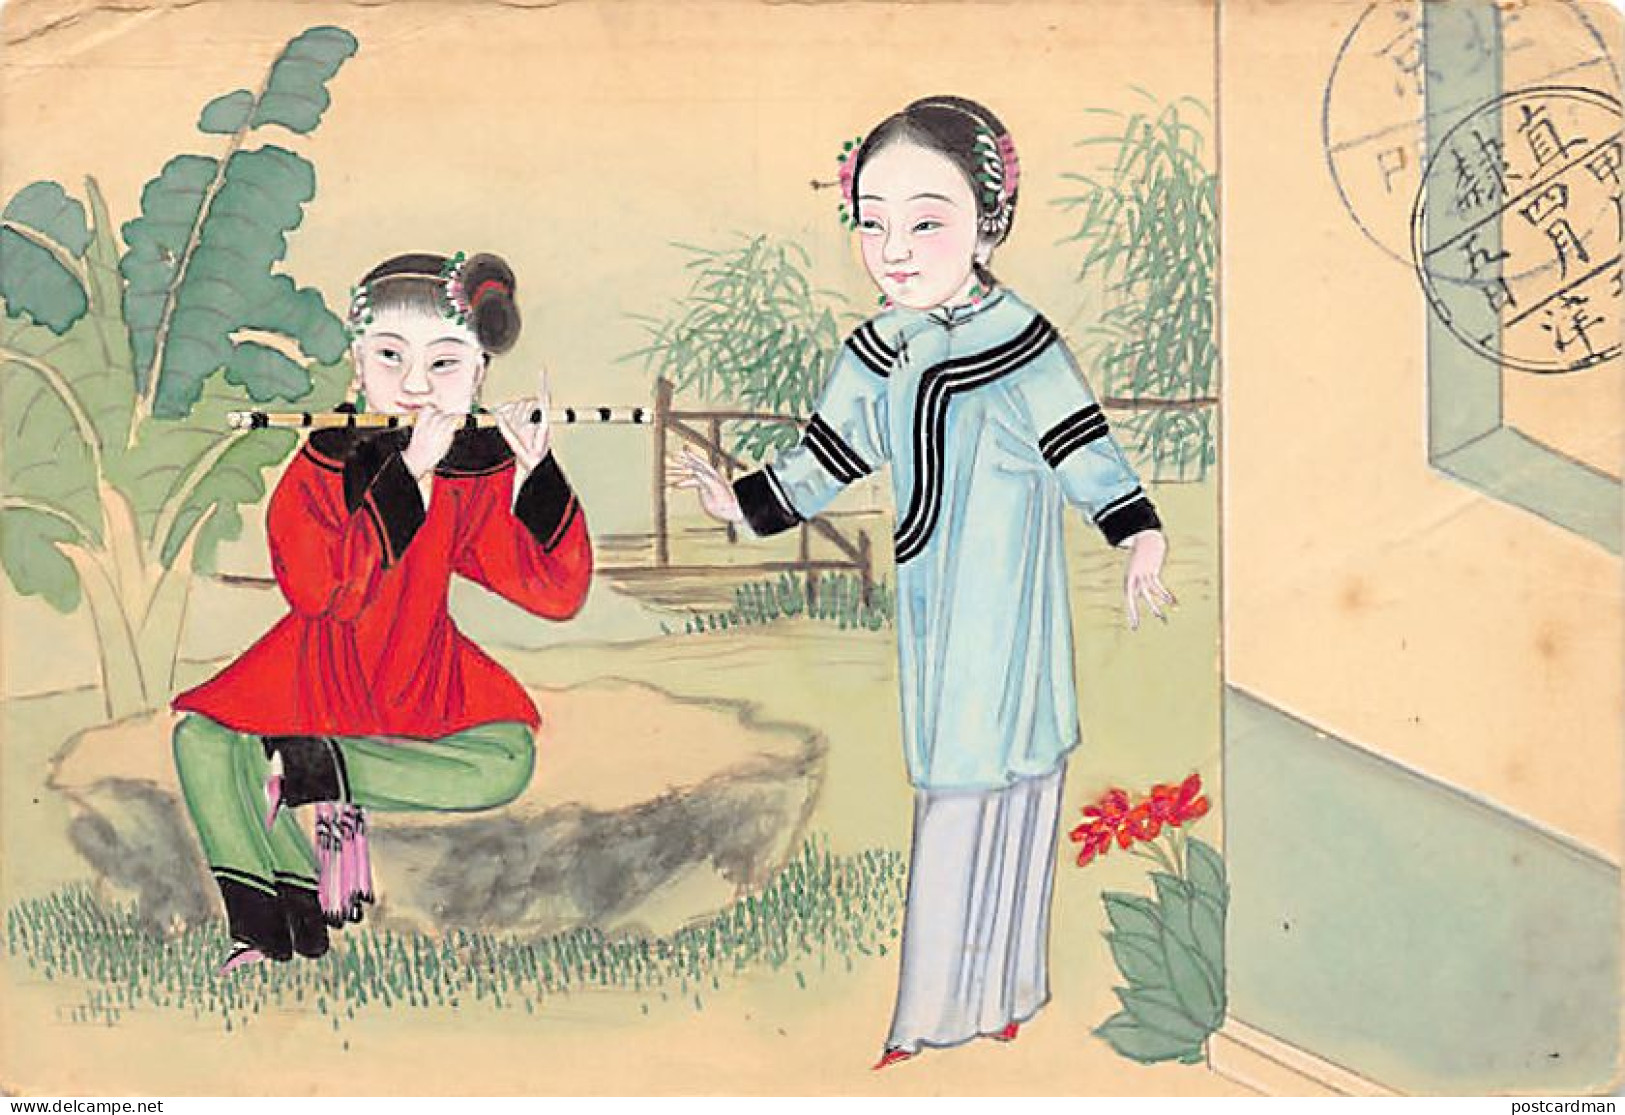 China - Chinese Ladies - The Flute Player - HANDPAINTED POSTCARD - Publ. Postal Stationery Chinese Imperial Post  1 Cent - China